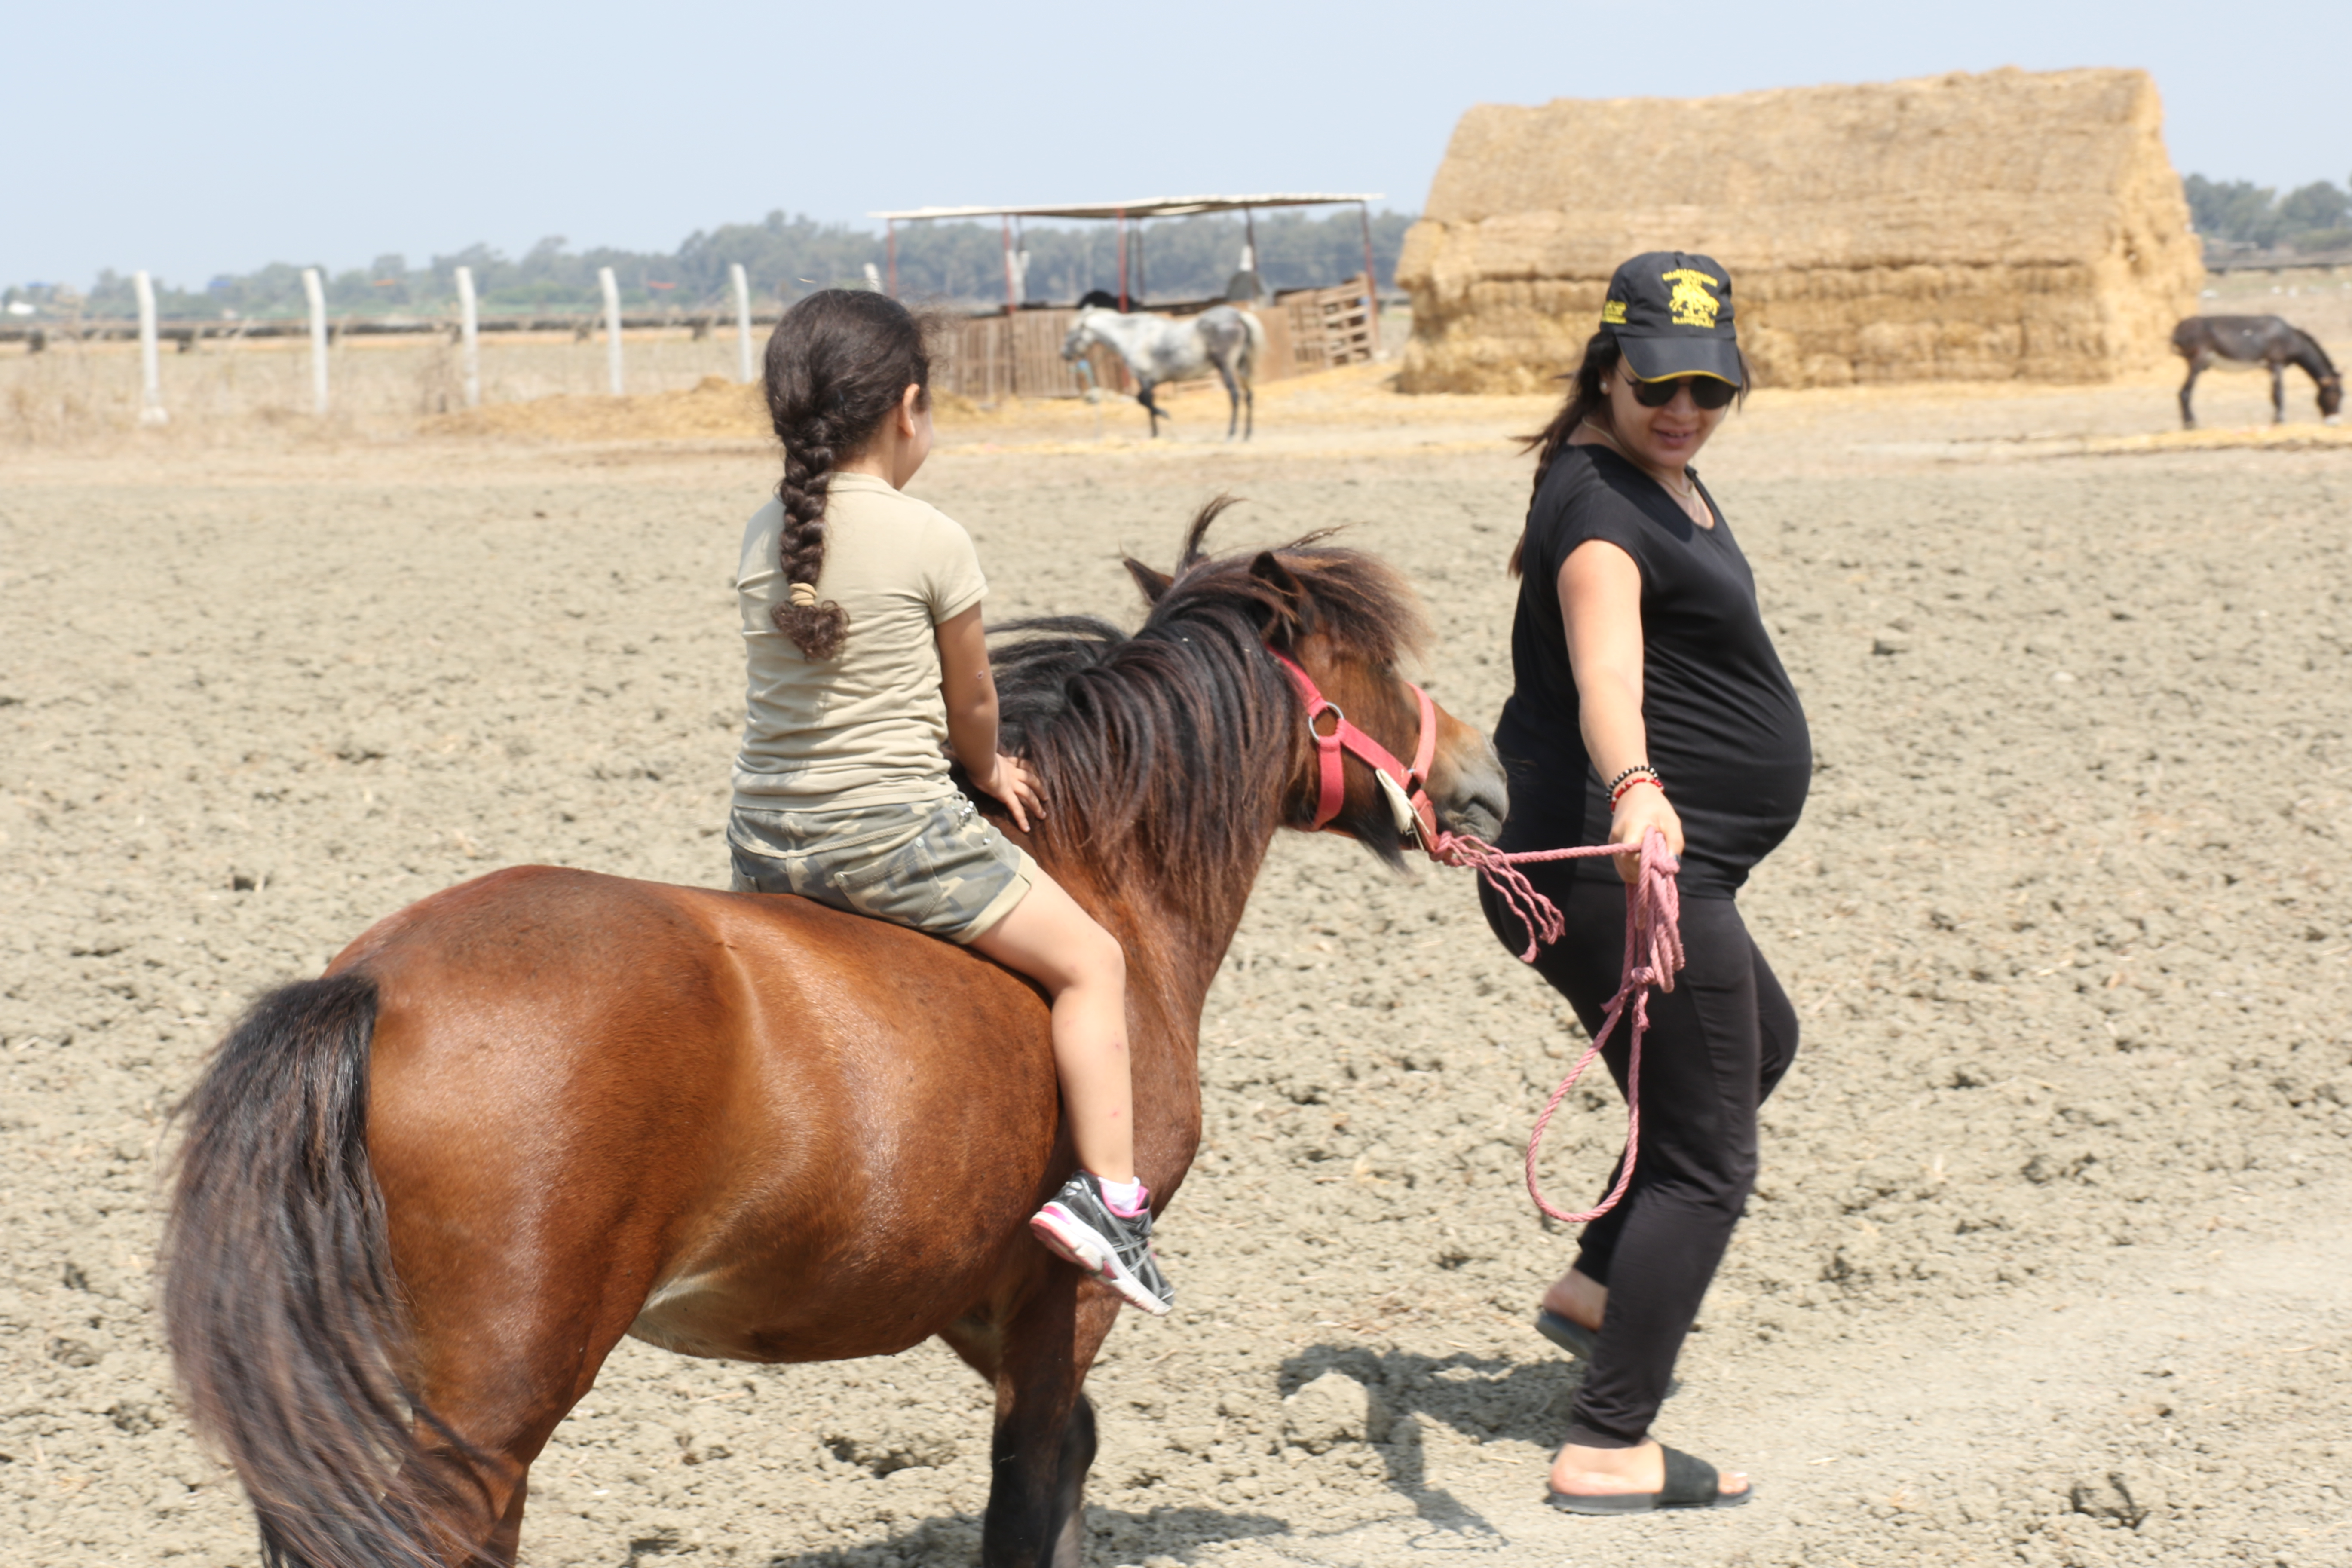 Pregnant mother in jeans and a t-shirt leads a pony that is shorter than she is. Her dauther sit on the pony without a saddle.